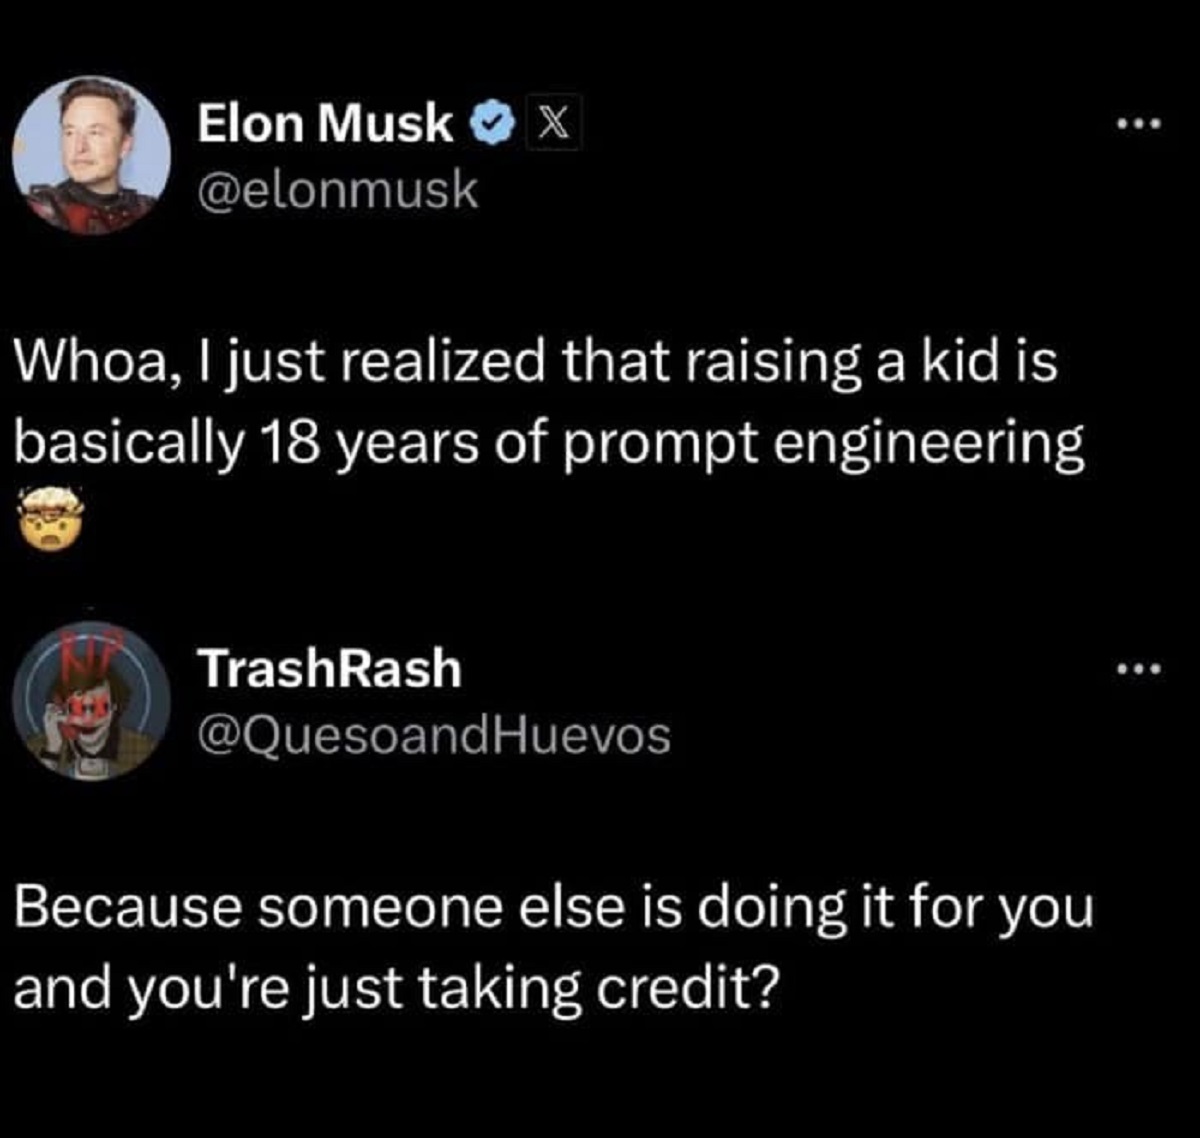 screenshot - Elon Musk X Whoa, I just realized that raising a kid is basically 18 years of prompt engineering TrashRash Because someone else is doing it for you and you're just taking credit?